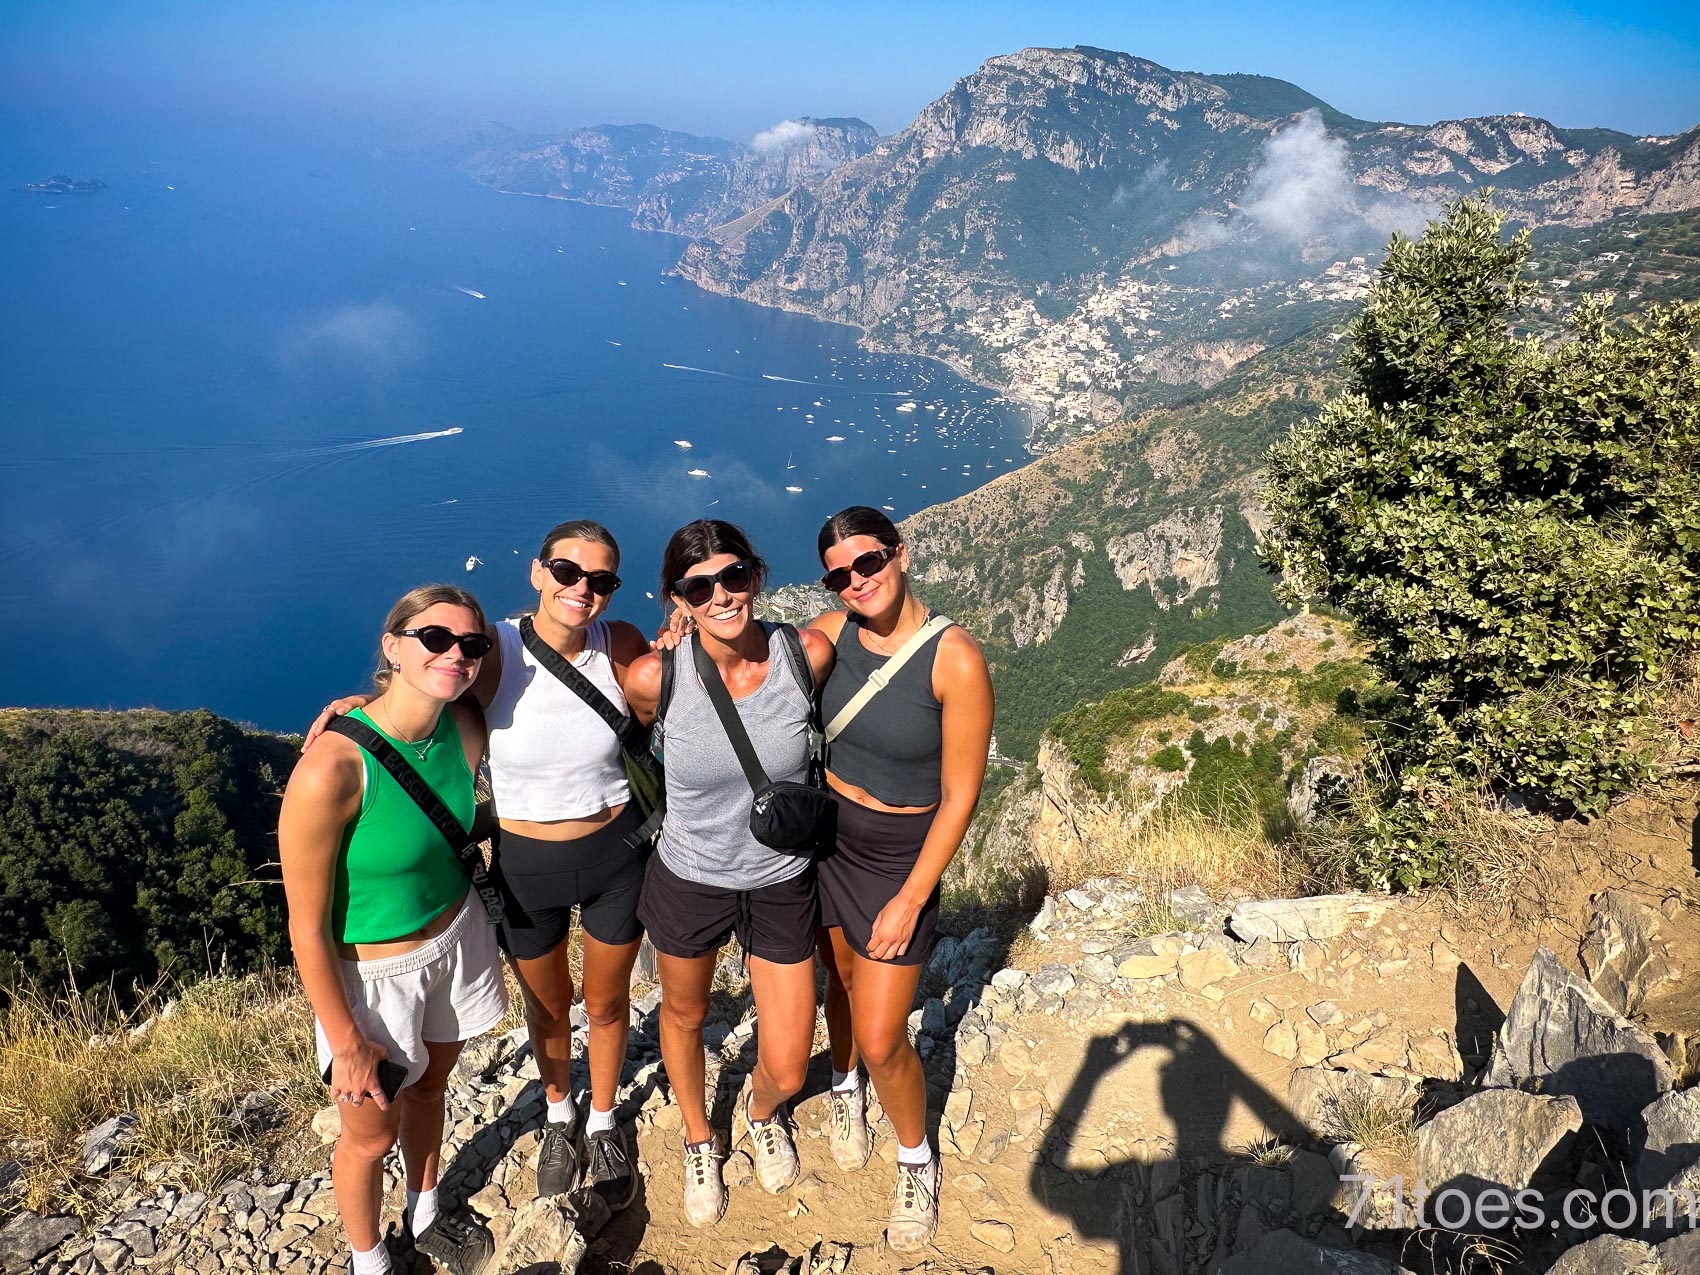 Shawni, Elle, Grace and Claire on the ridge-line of the Path of the Gods